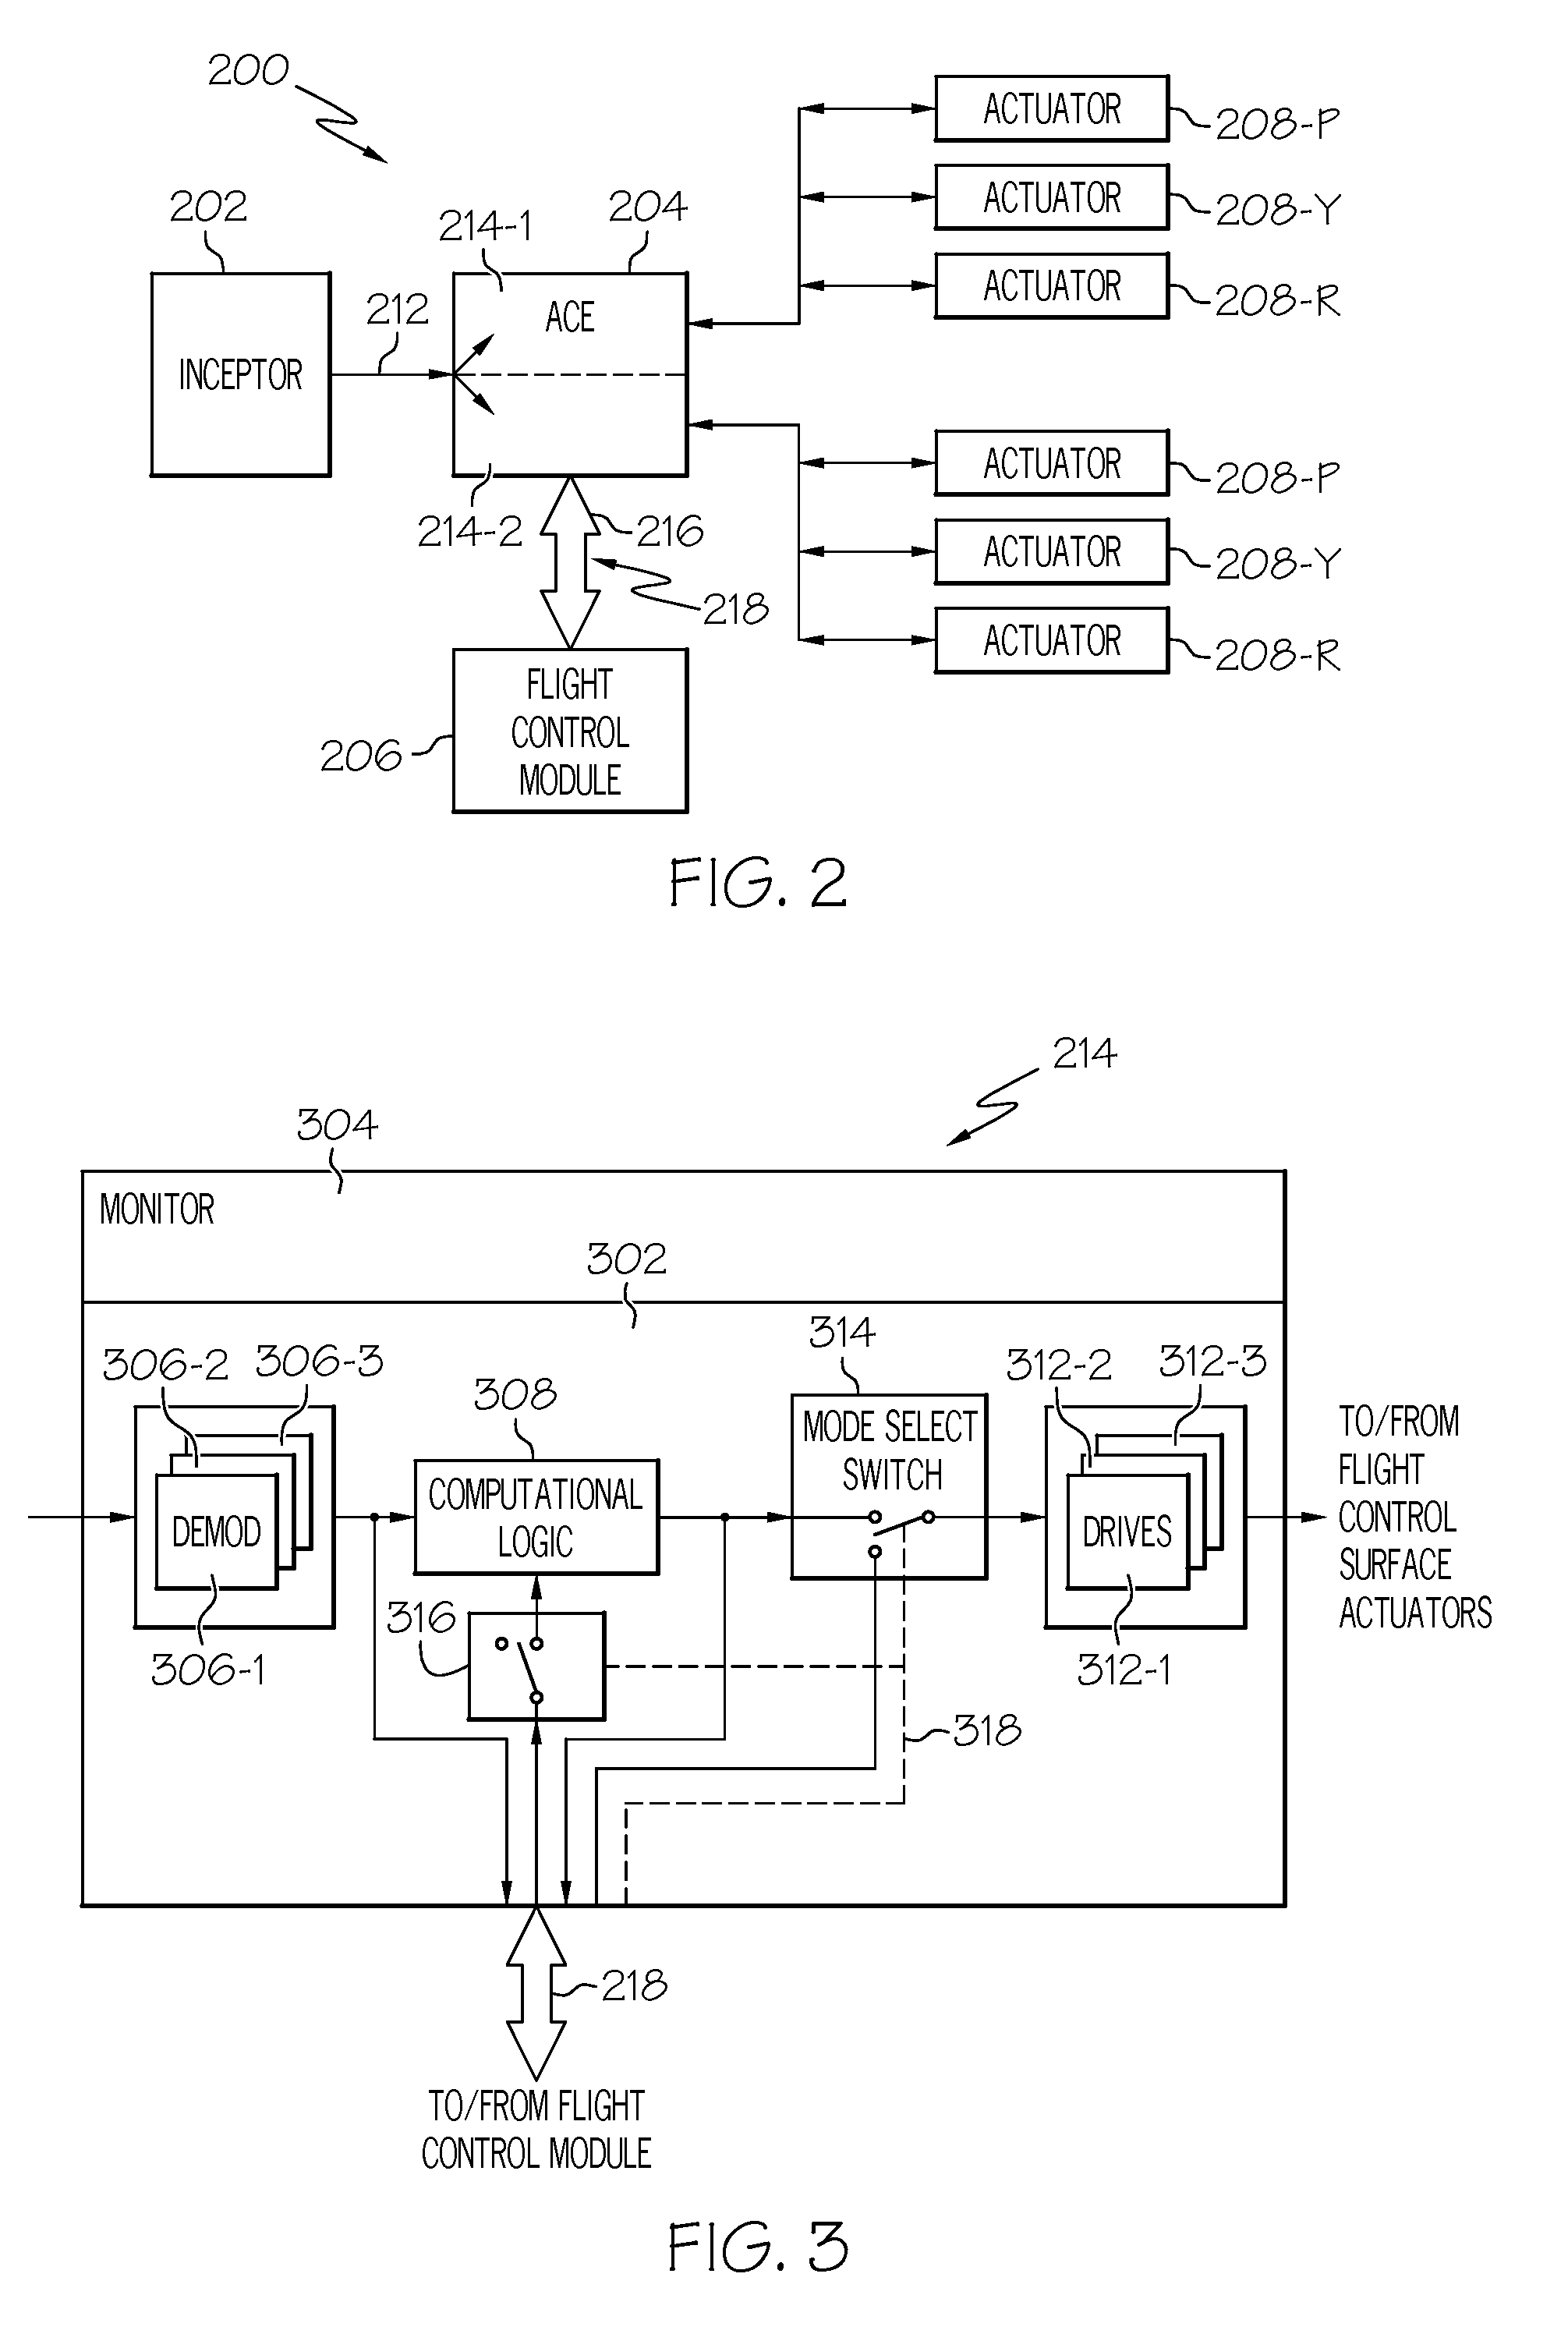 Limited authority and full authority mode fly-by-wire flight control surface actuation control system